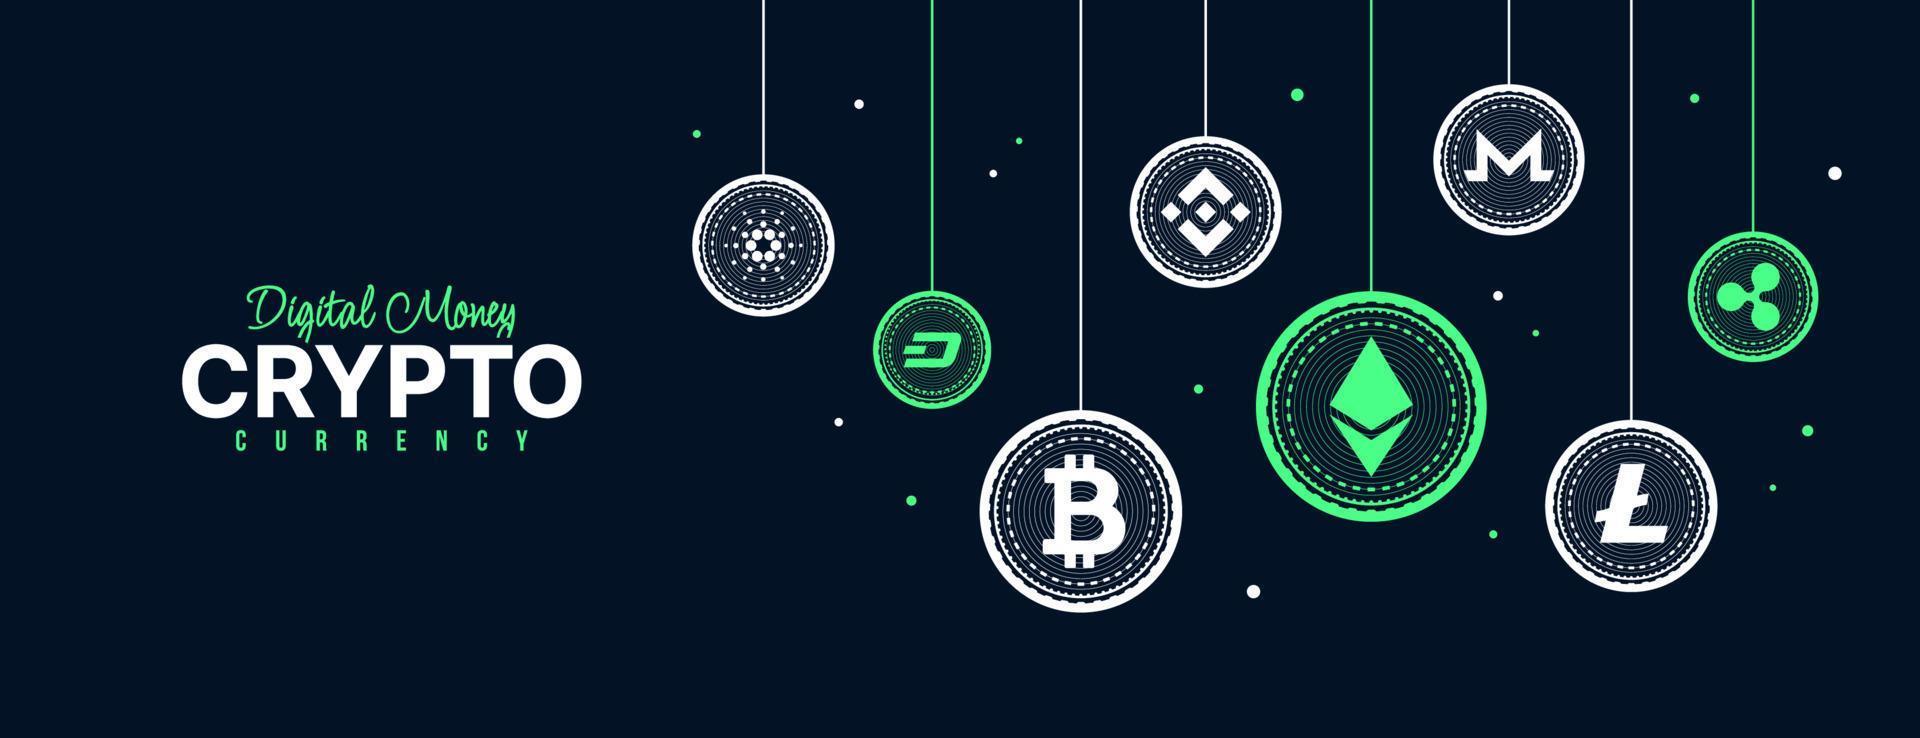 Crypto currency icons background, Digital money exchange of Blockchain technology banner, Cryptocurrency mining and financial concept vector